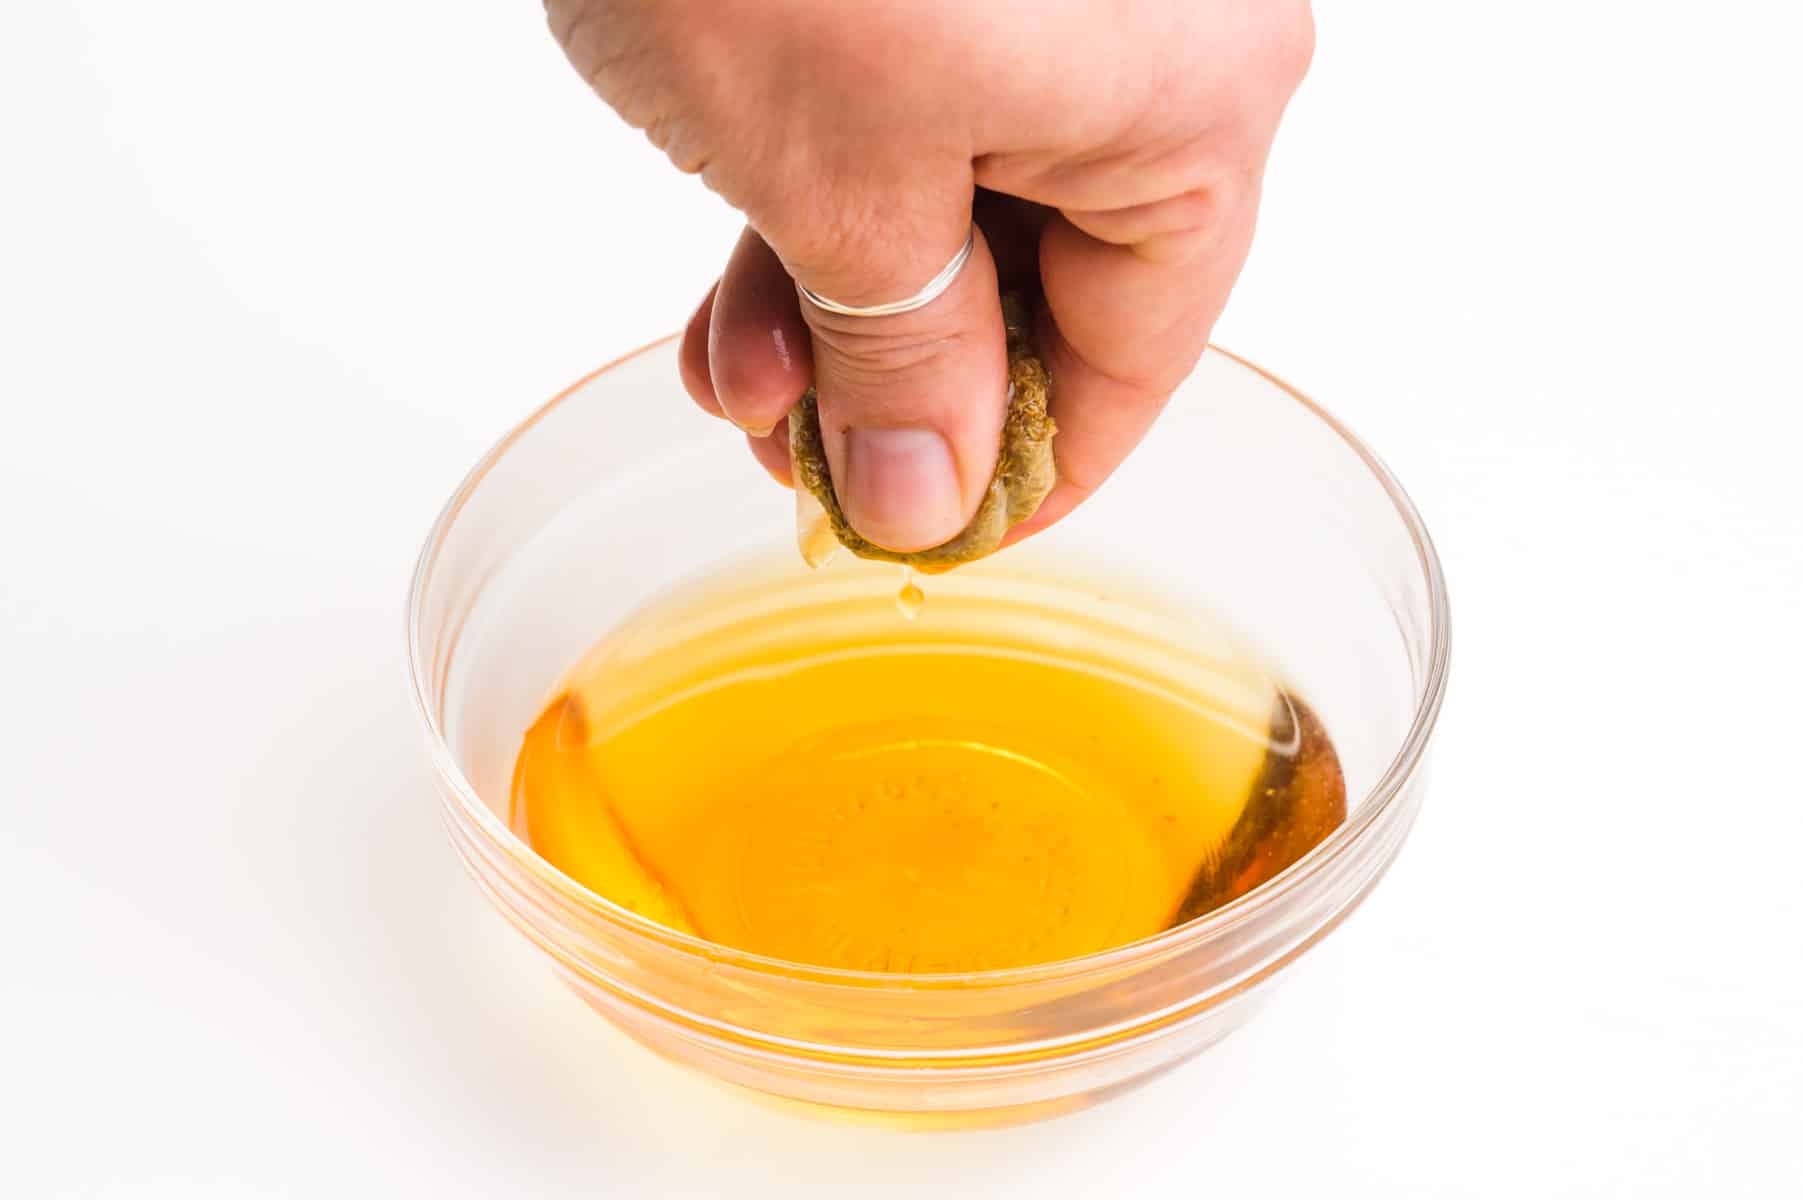 A hand holds a tea bag, it's squeezing over a bowl of syrup.